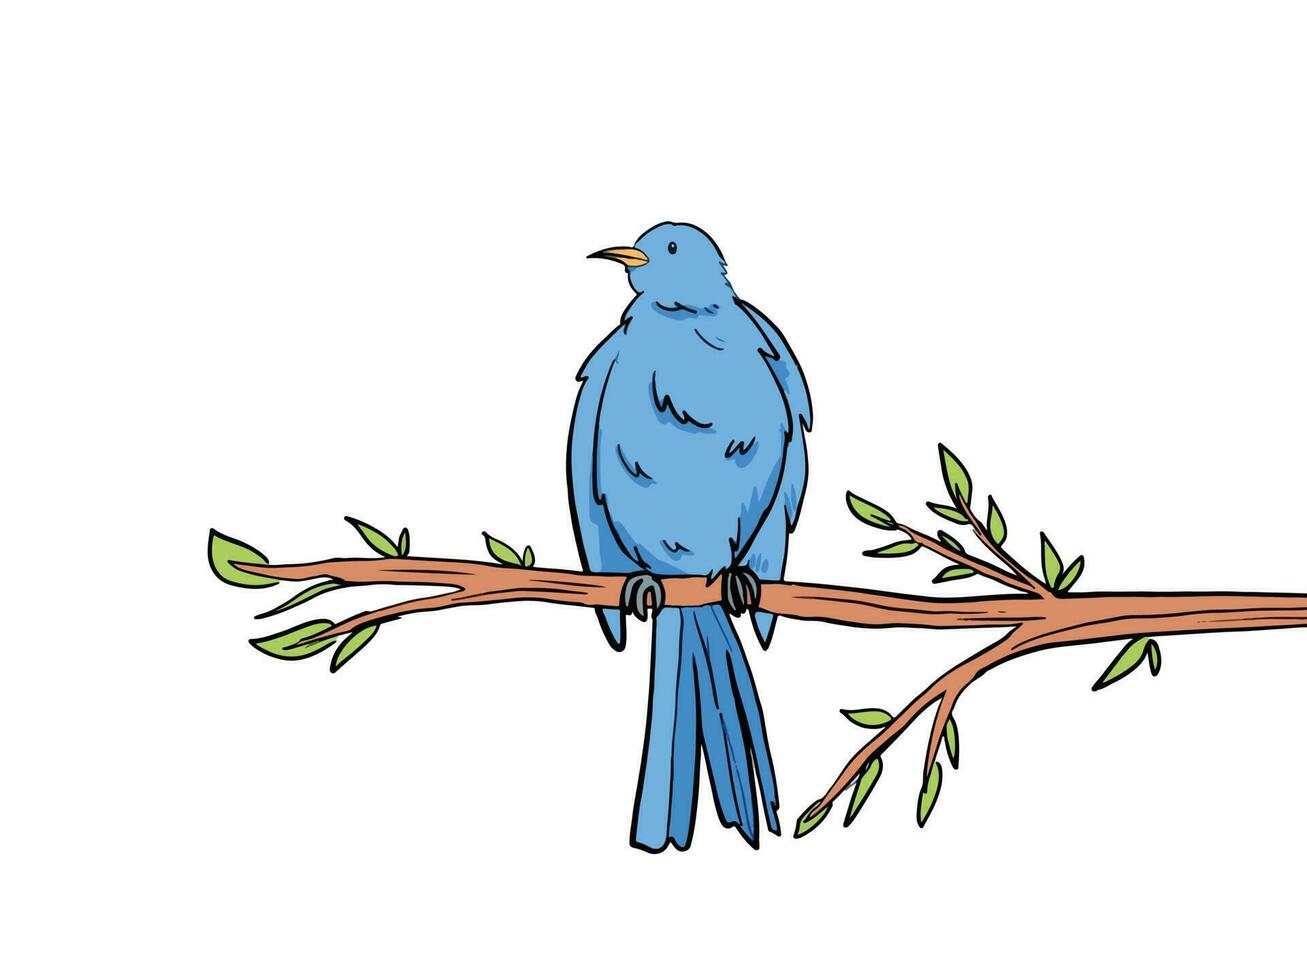 Drawing Of A Bird Sitting On A Stick Background, Picture Of Bird Drawing  Background Image And Wallpaper for Free Download